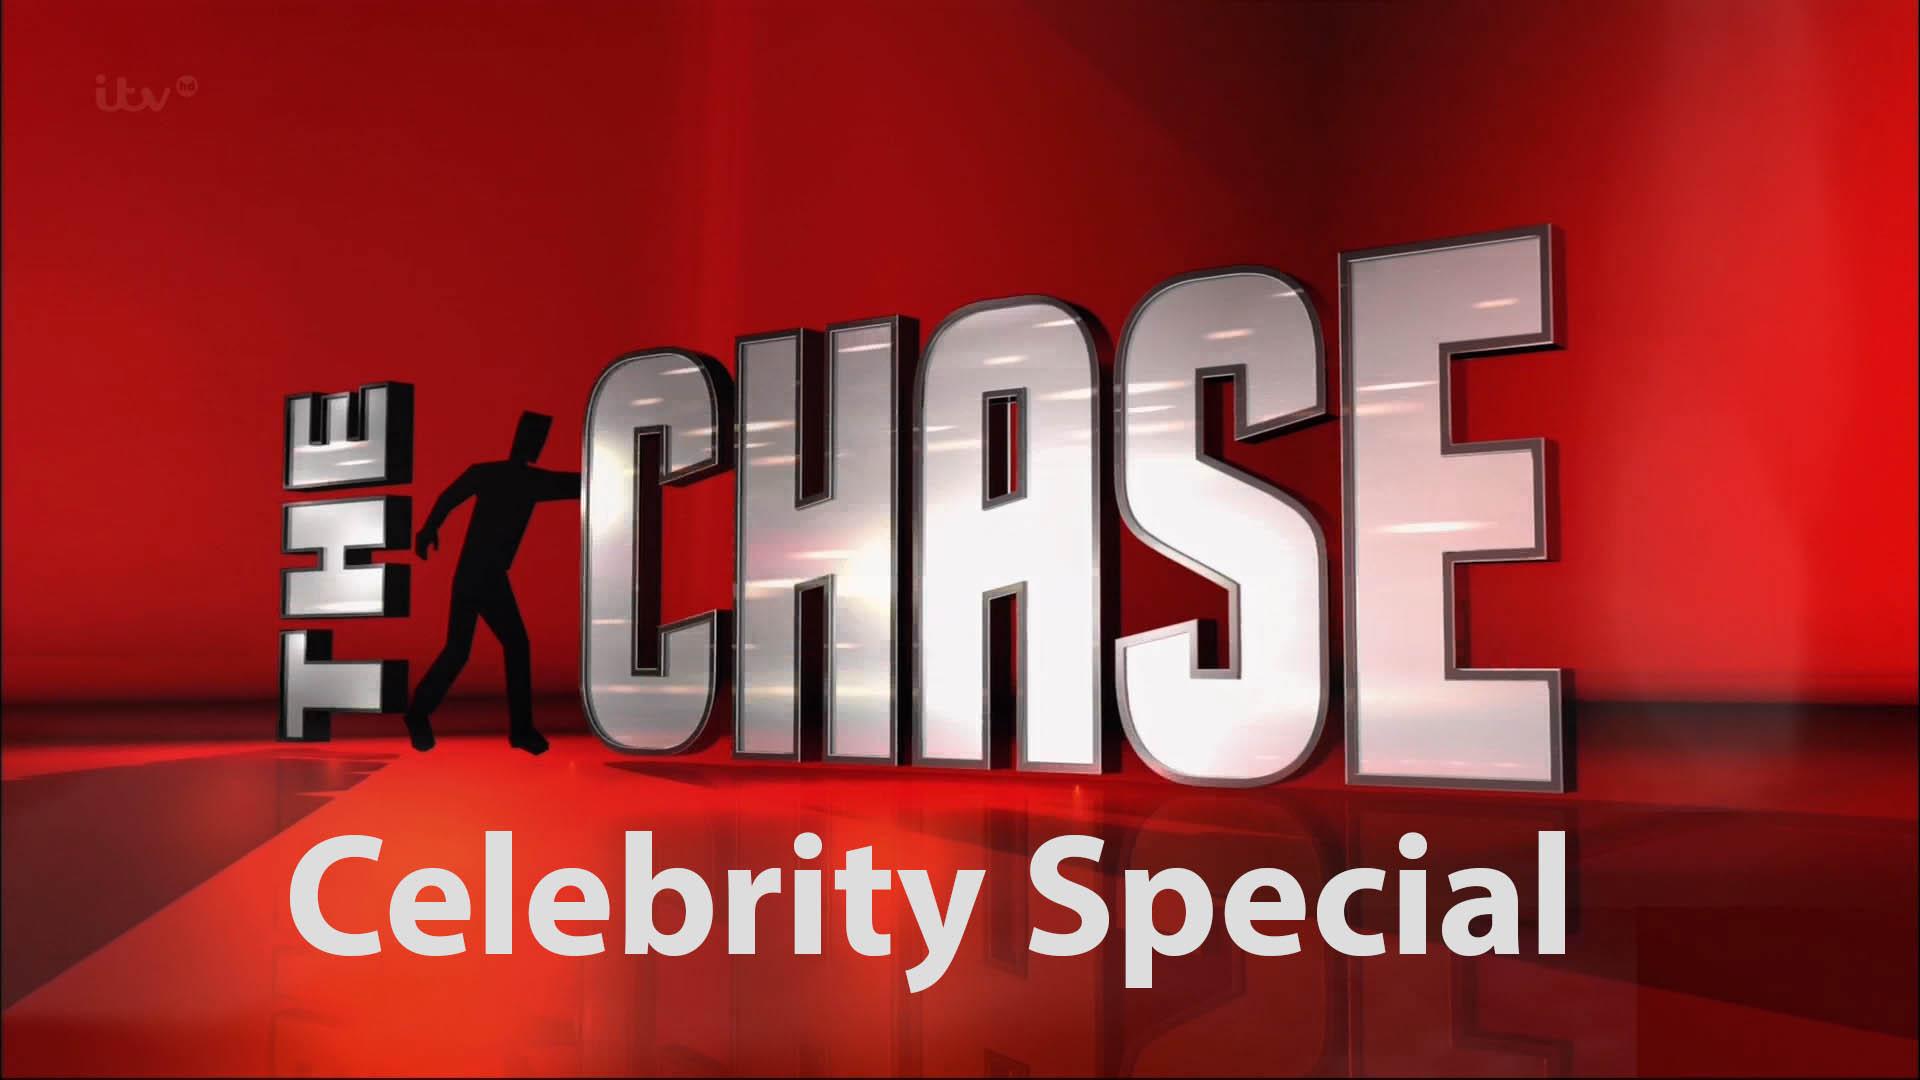 The Chase: Celebrity Special